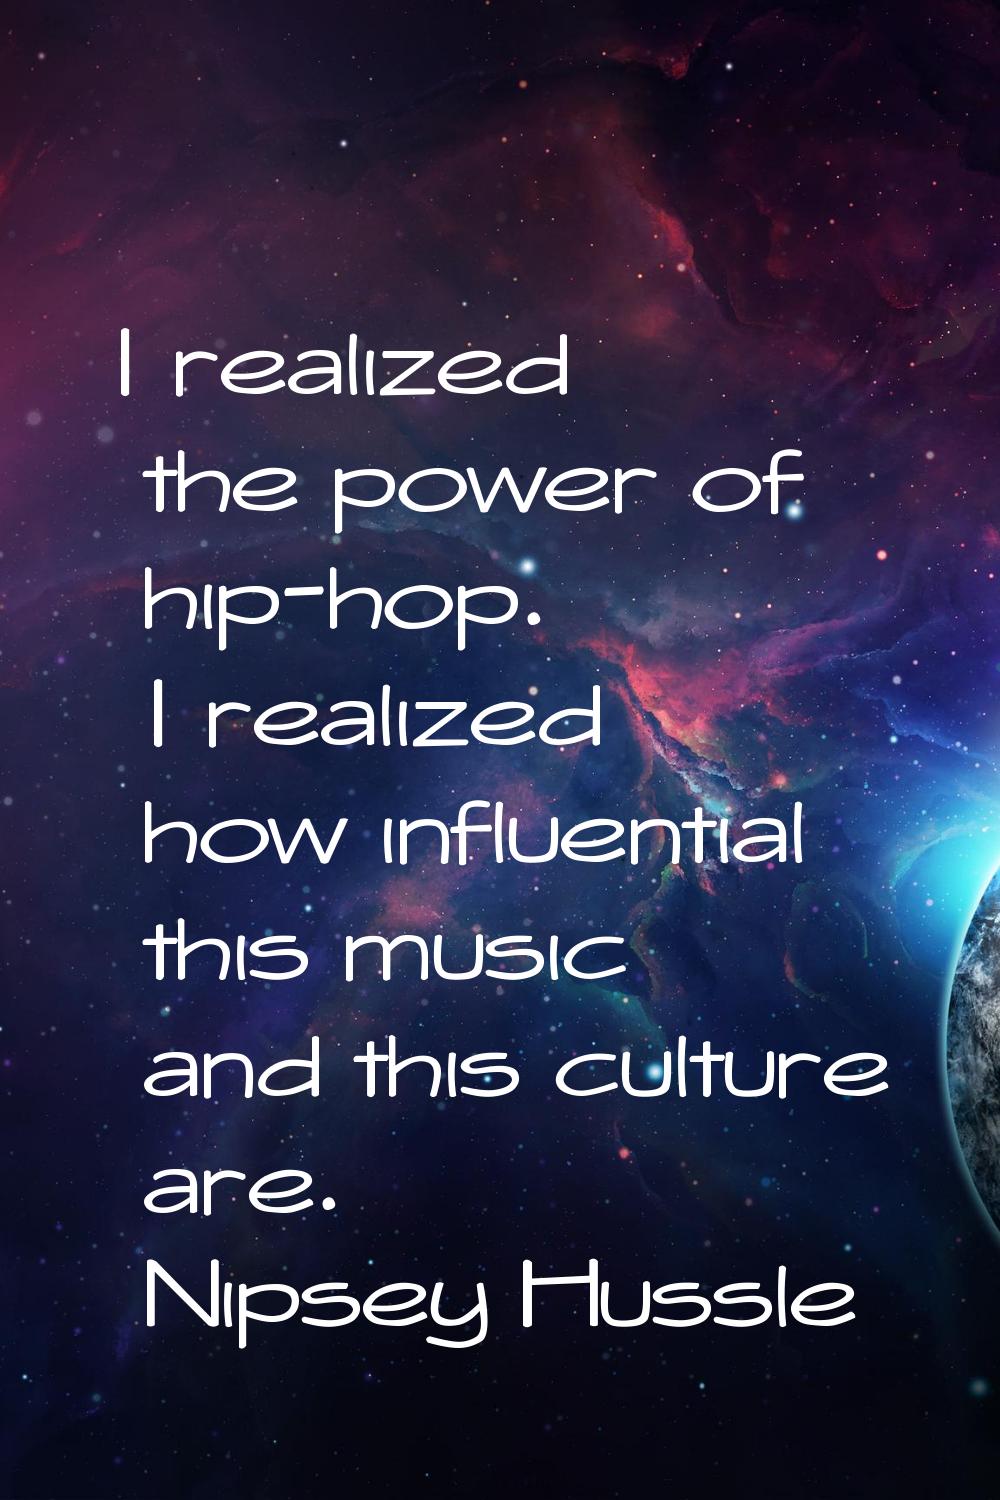 I realized the power of hip-hop. I realized how influential this music and this culture are.